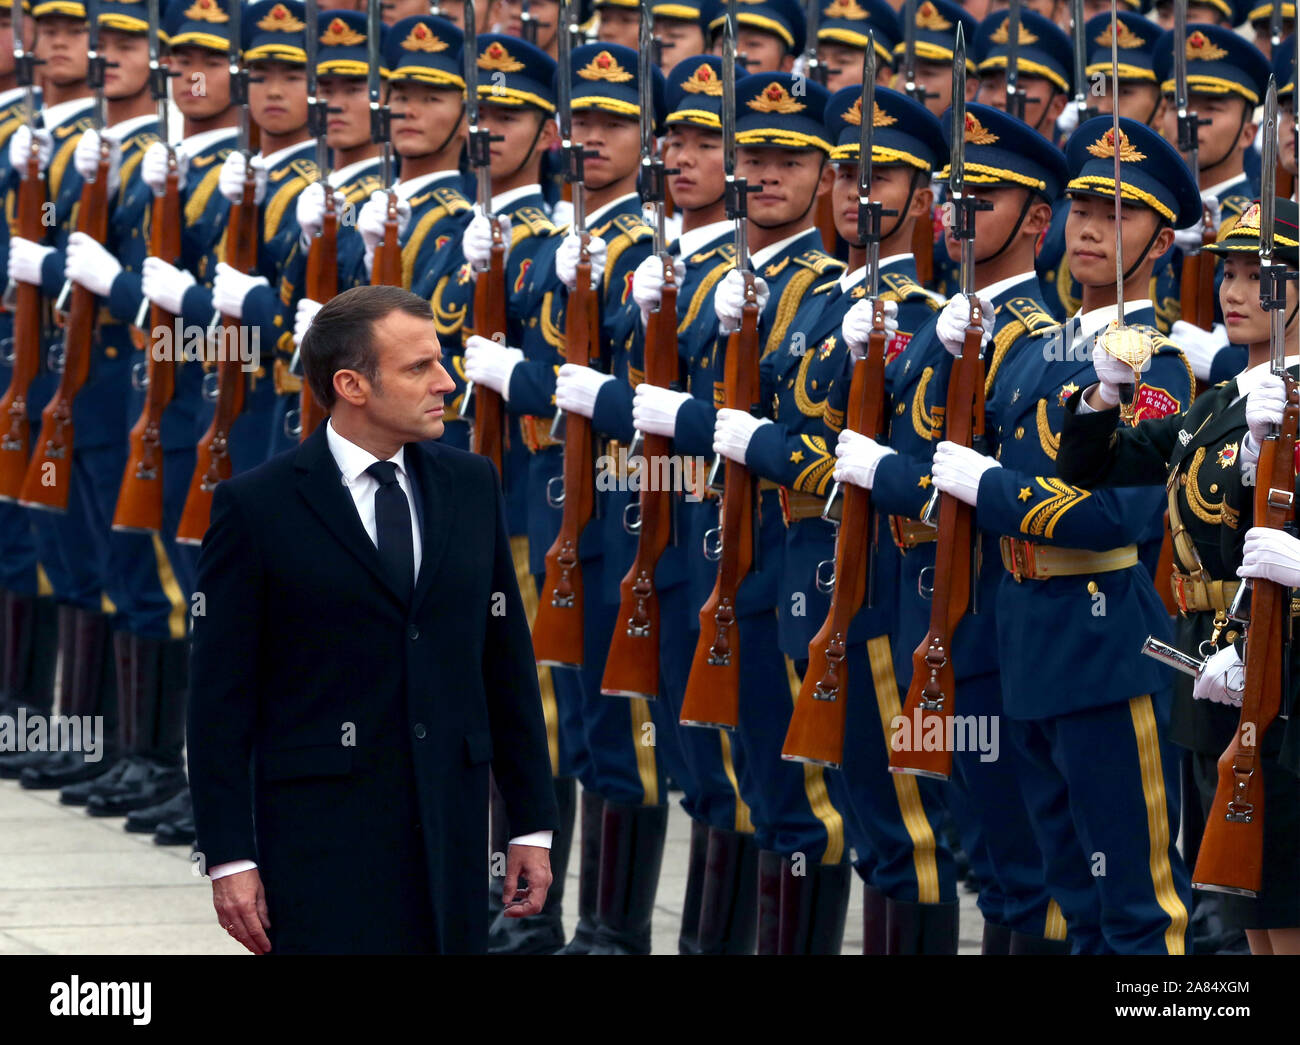 Beijing, China. 06th Nov, 2019. French President Emmanuel Macron attends a welcoming ceremony at the Great Hall of the People in Beijing on Wednesday, November 6, 2019. After the ceremony, Xi said the two leaders had 'sent a strong signal to the world about steadfastly upholding multilateralism and free trade, as well as working together to build open economies.' Photo by Stephen Shaver/UPI Credit: UPI/Alamy Live News Stock Photo